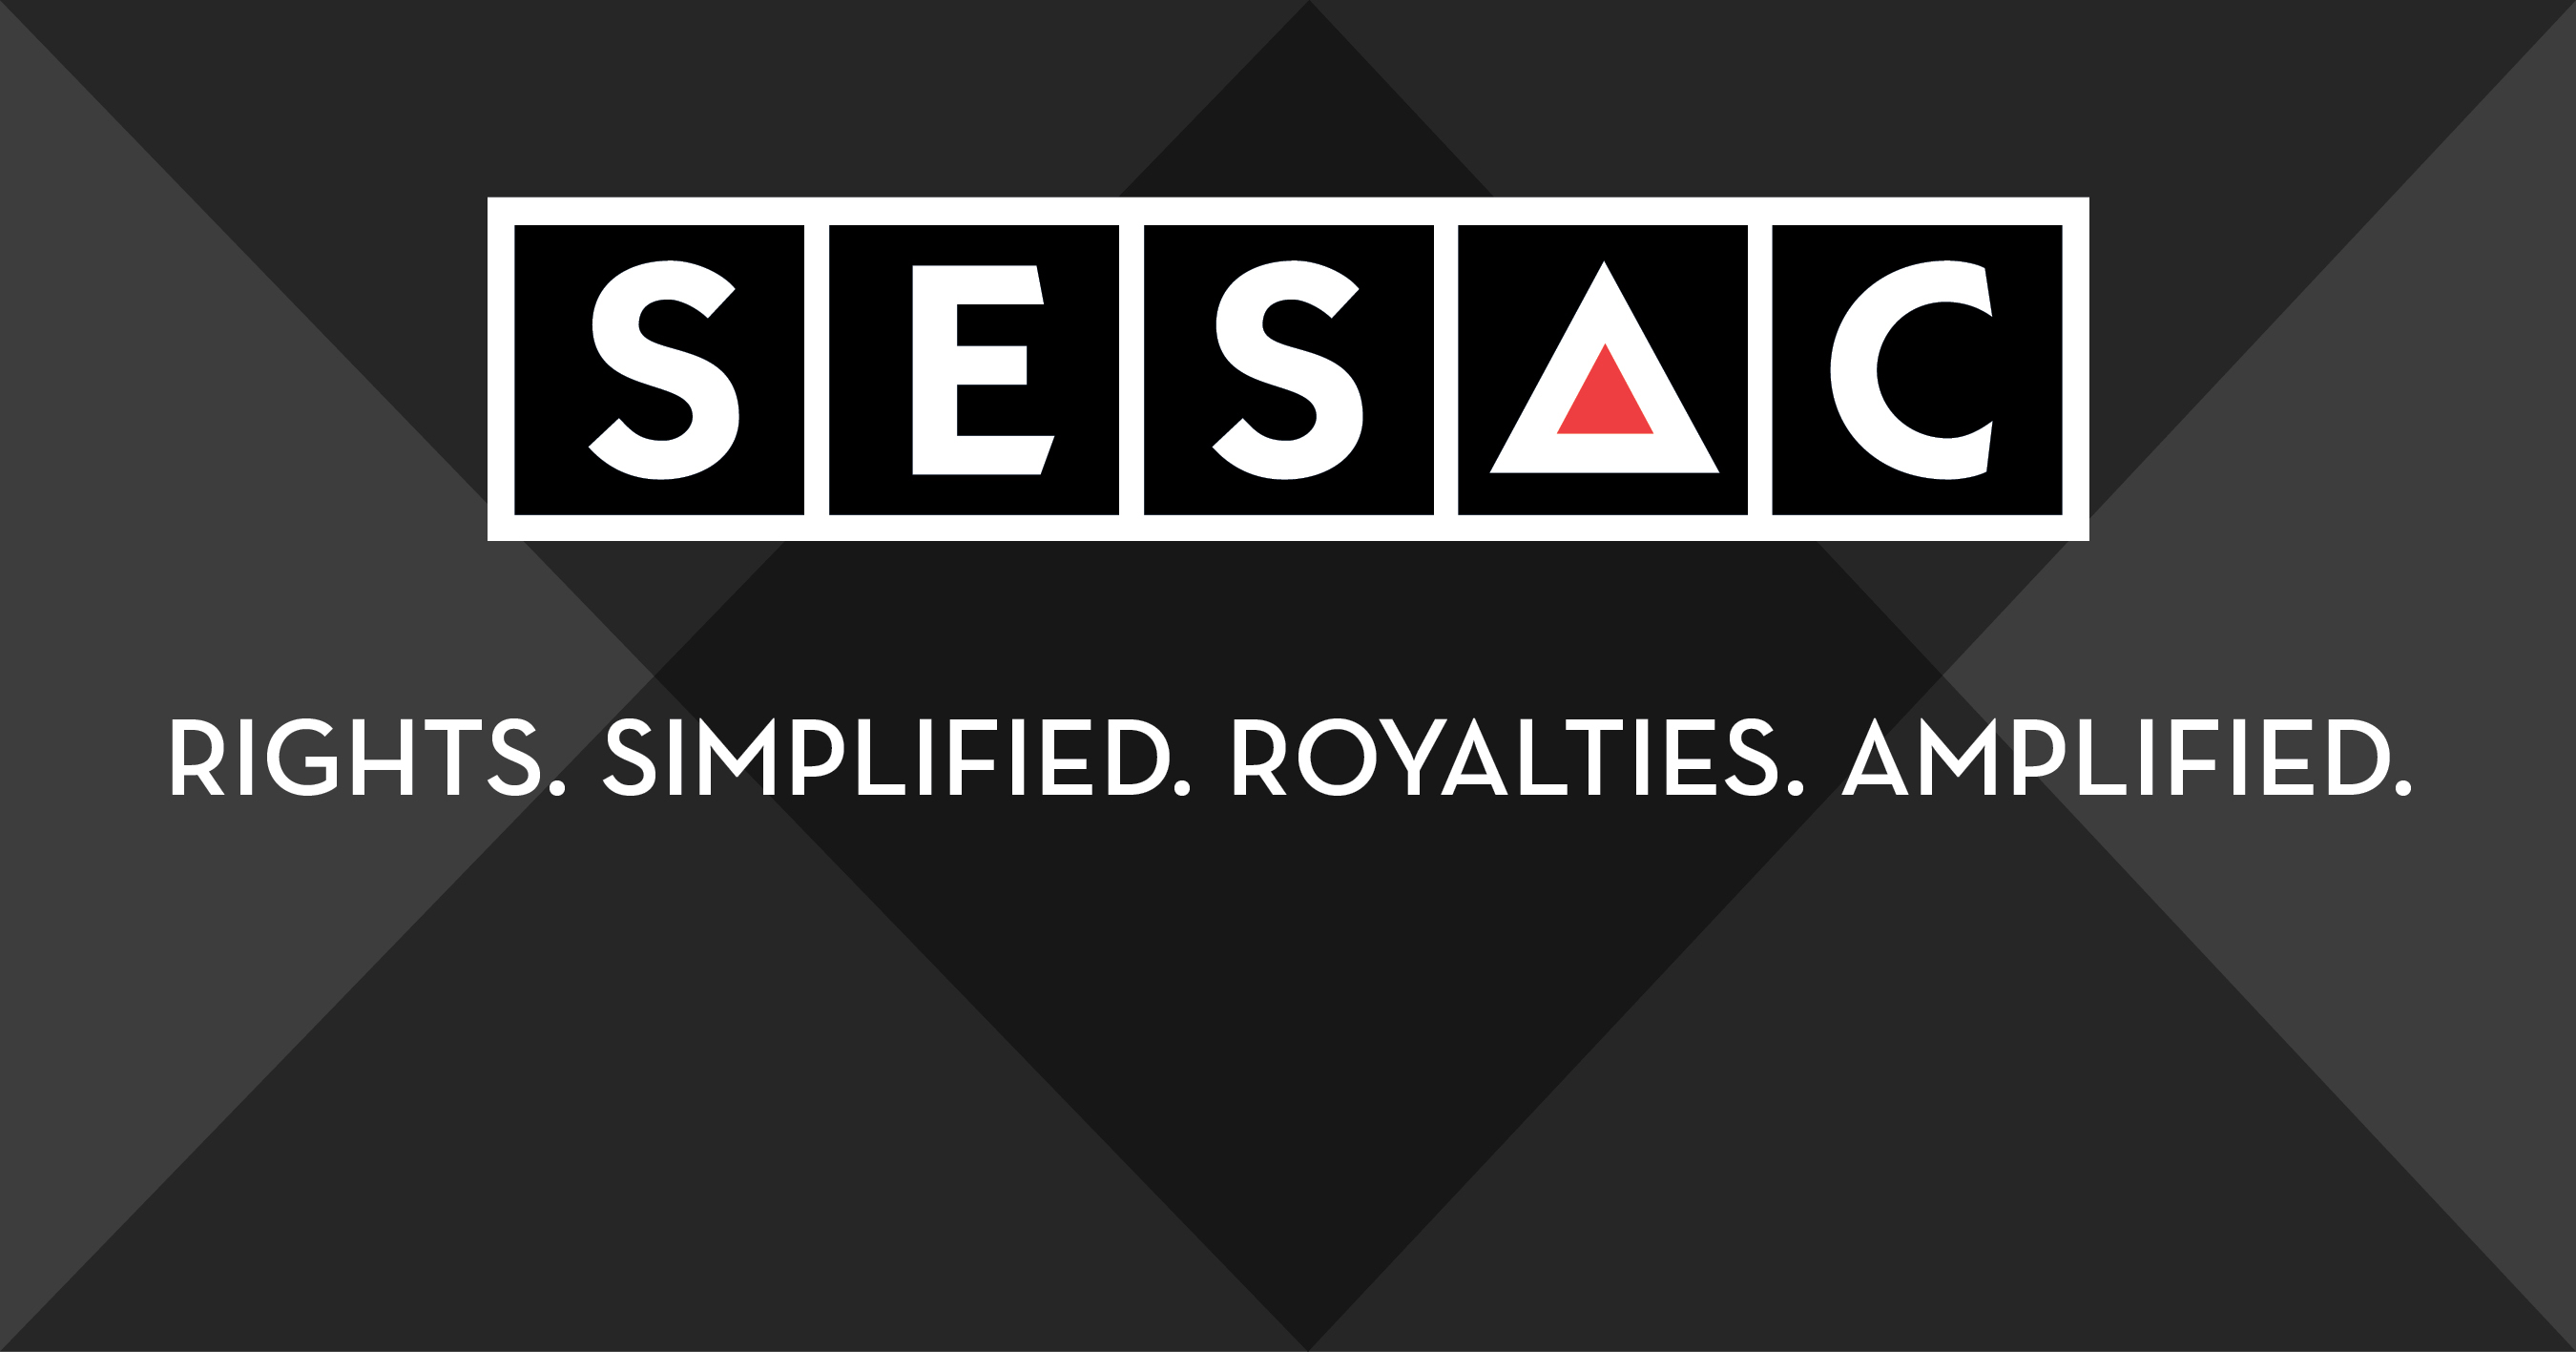 Investors want to Invest in Music Rights Companies – SESAC Restructuring Oversubscribed (Who is Next?)